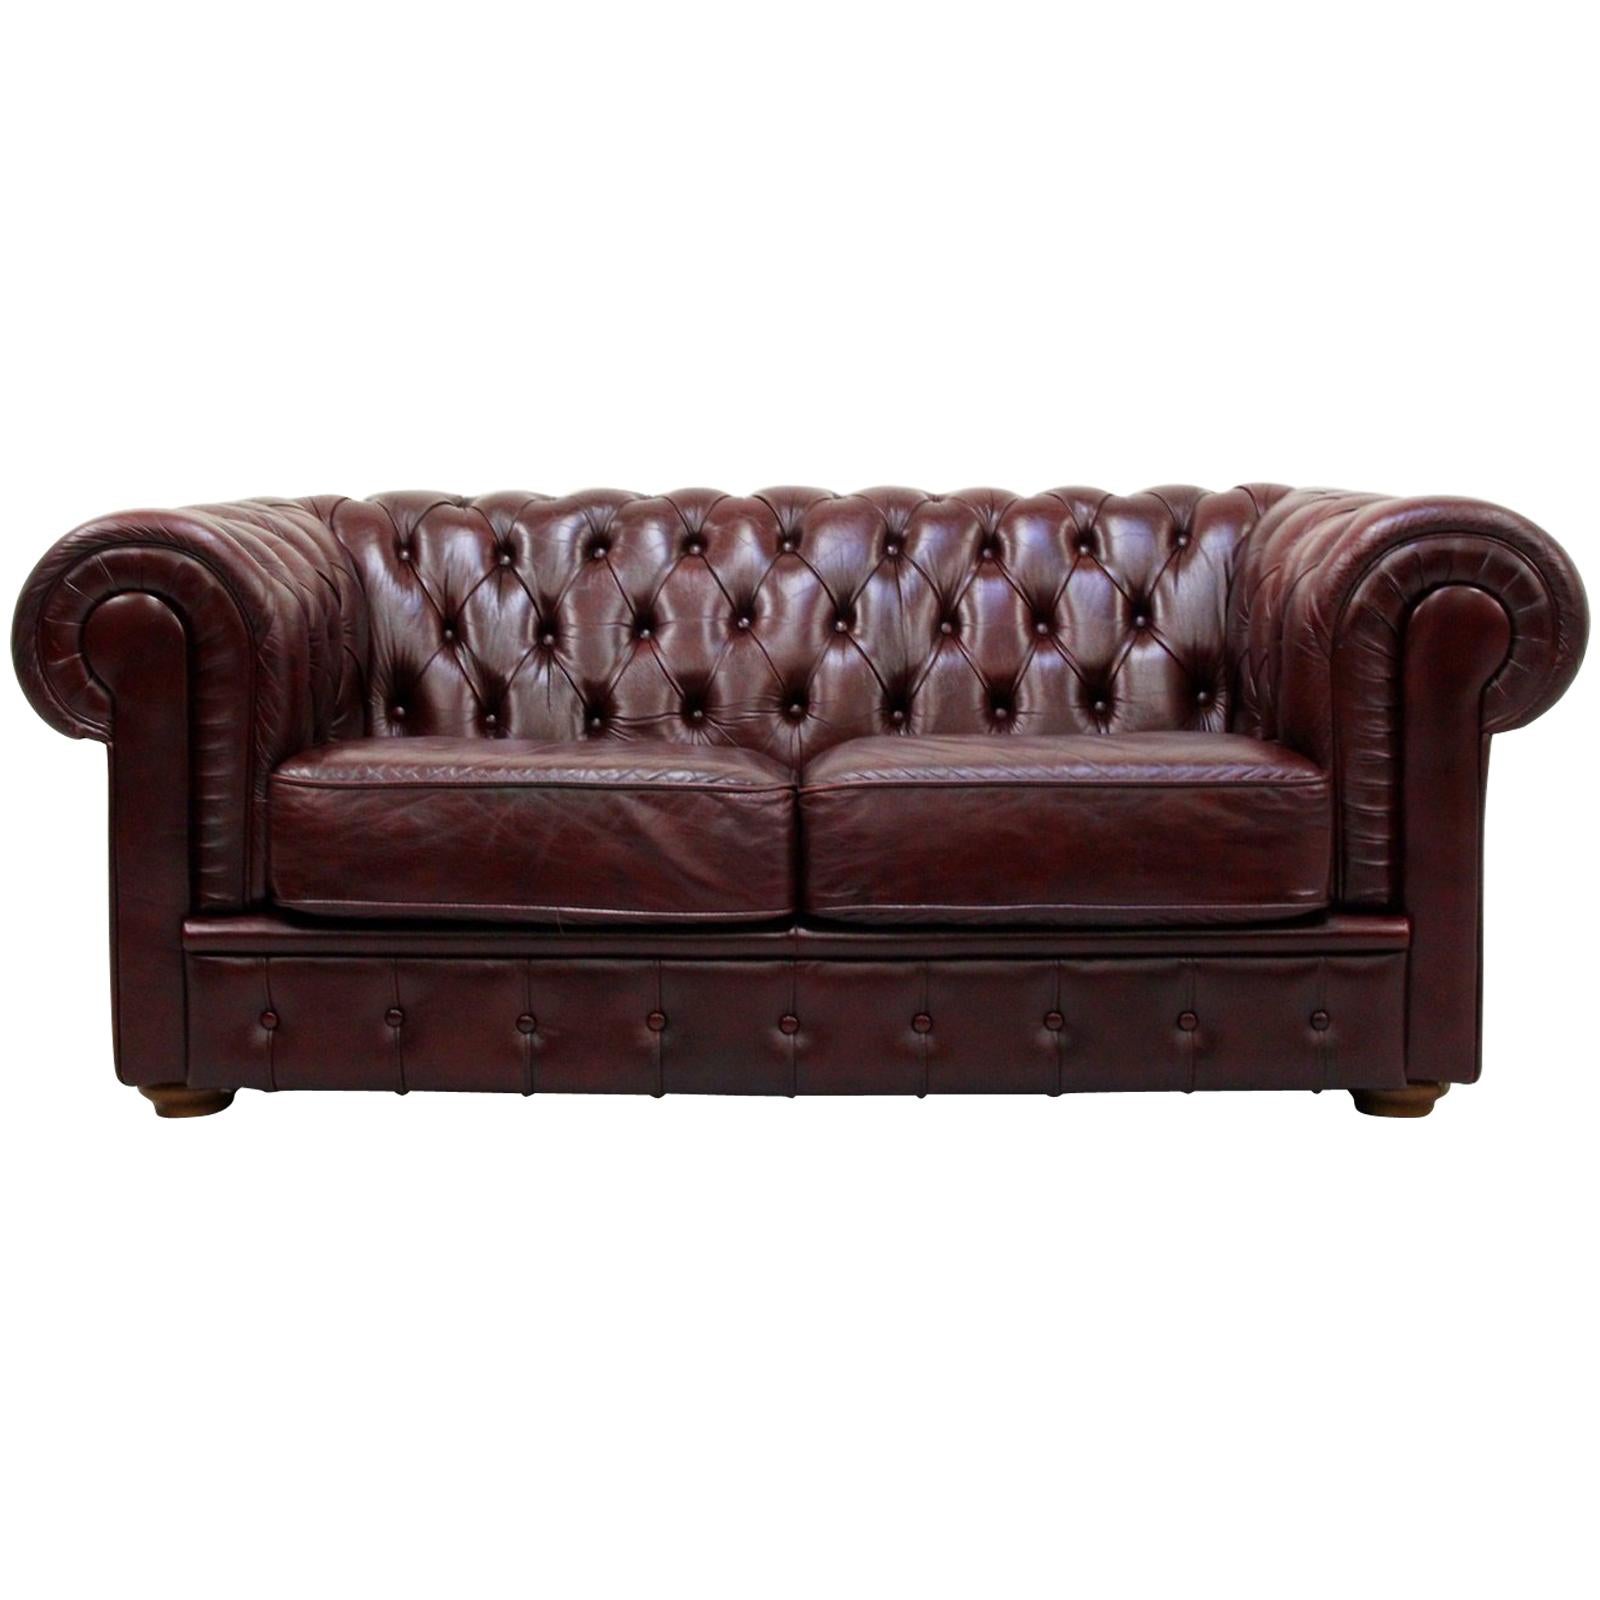 Chesterfield English Sofa Leather Antique Vintage Couch Chippendale For Sale